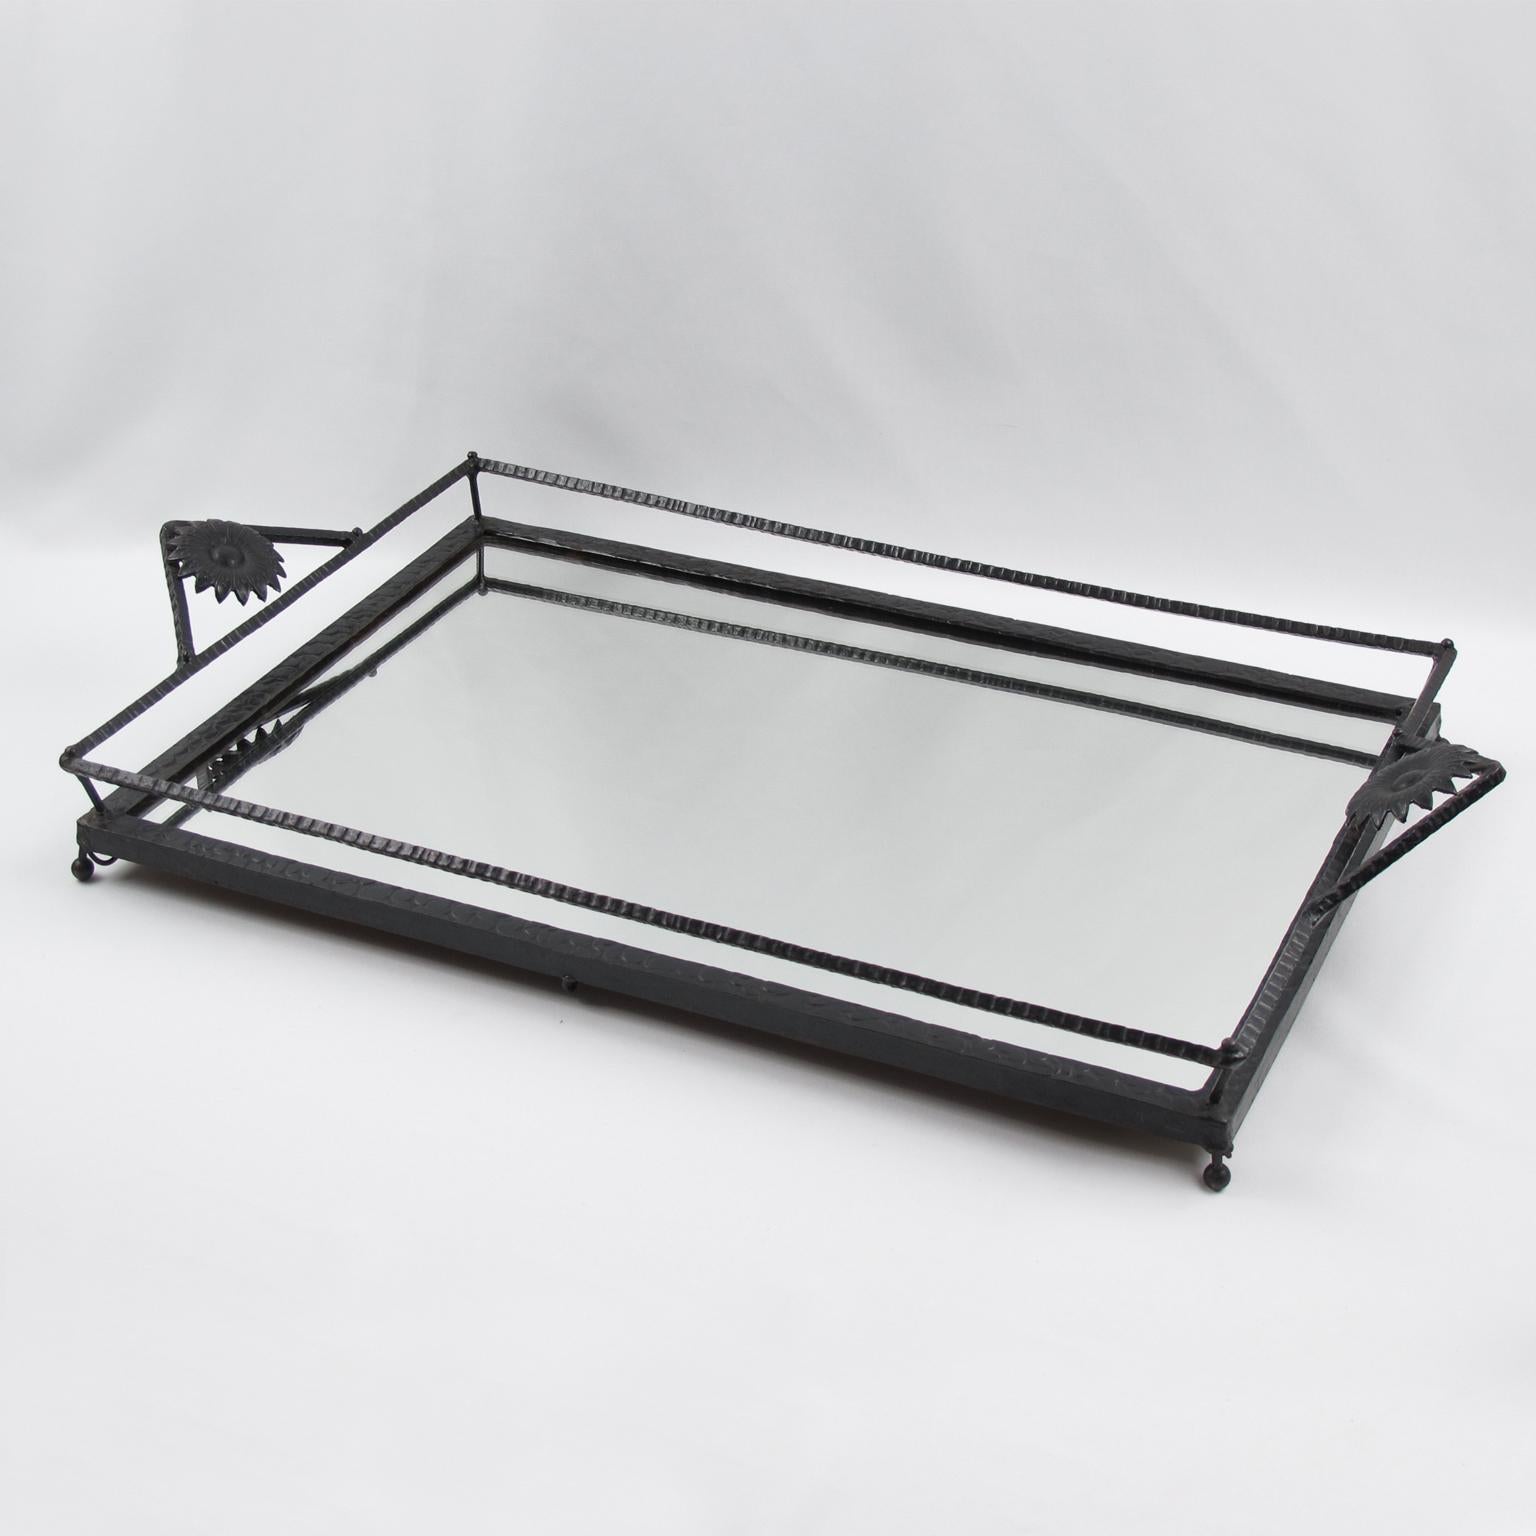 Impressive large Art Nouveau serving tray, featuring wrought iron framing in black finish patina with hammered textured pattern. Very nice floral handles and mirrored glass insert. Large dimensions, perfect for barware, cocktail serving or any